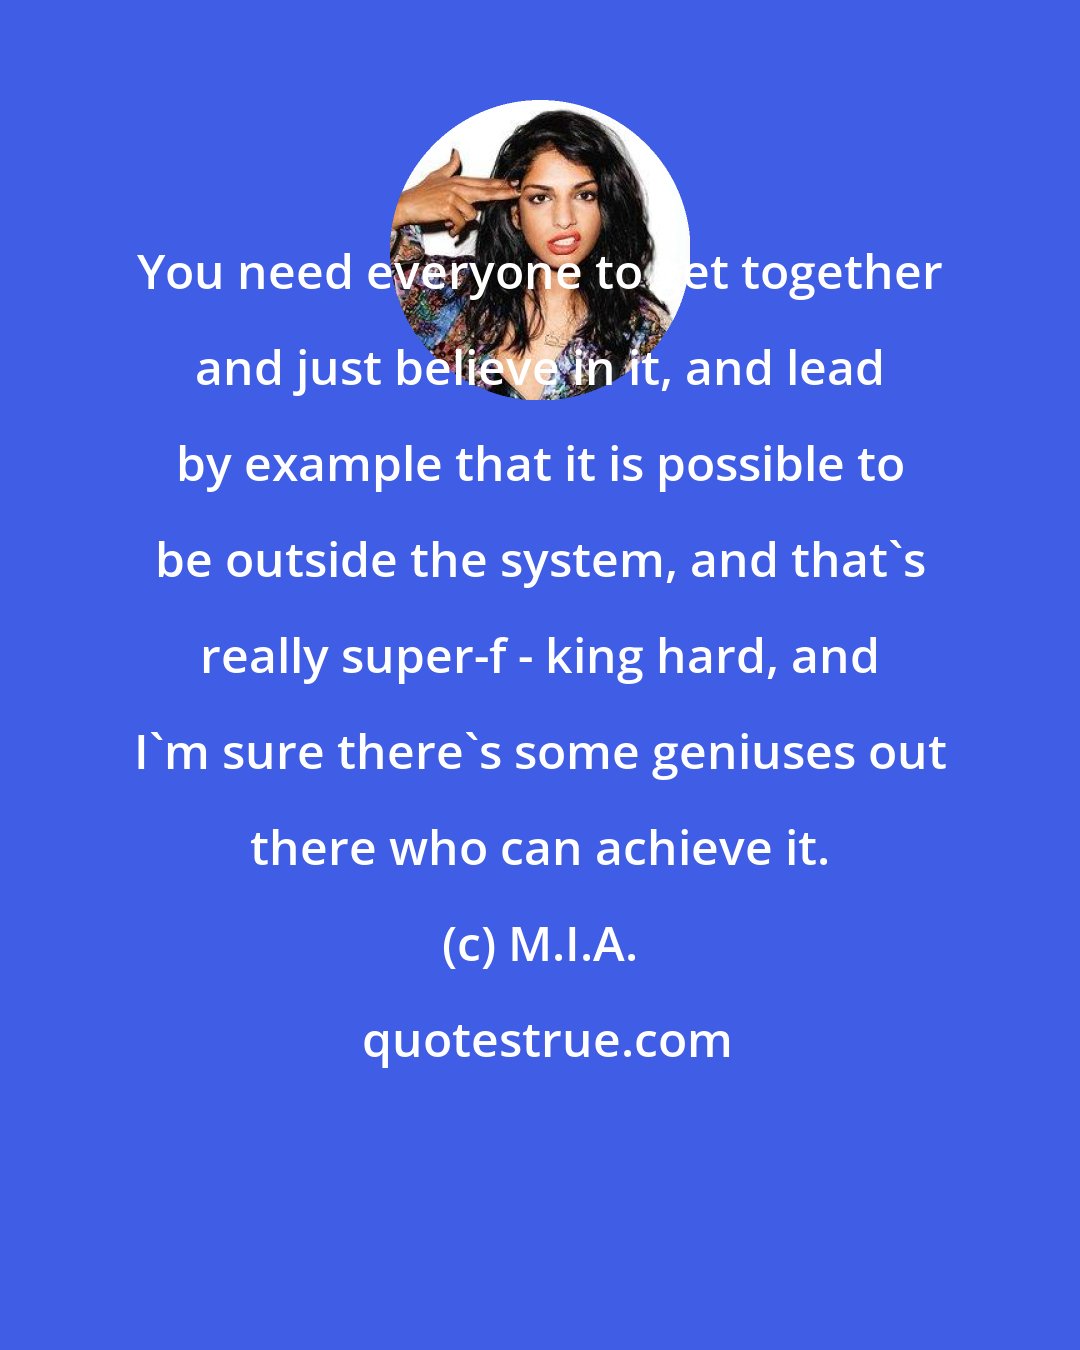 M.I.A.: You need everyone to get together and just believe in it, and lead by example that it is possible to be outside the system, and that's really super-f - king hard, and I'm sure there's some geniuses out there who can achieve it.